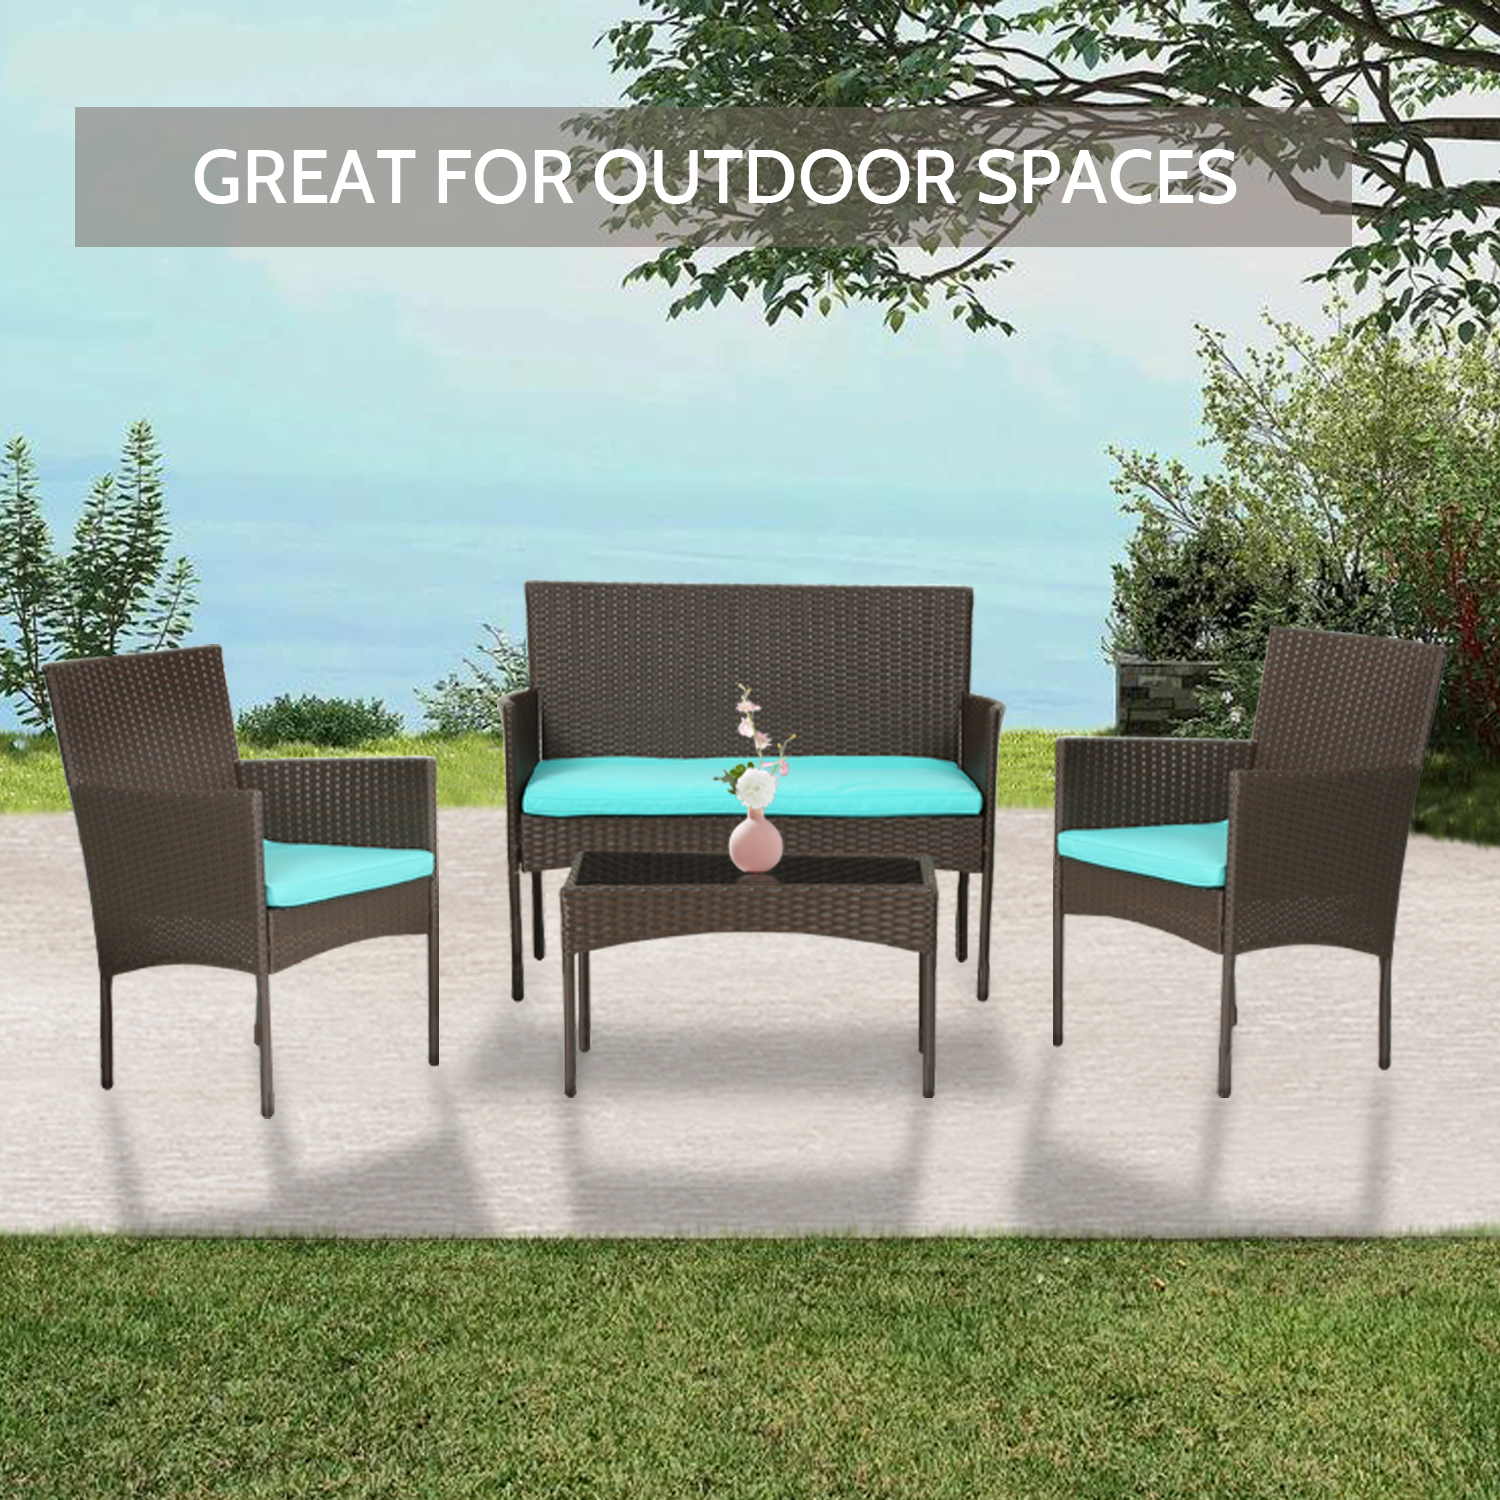 4 Pieces Patio Furniture Set Wicker Patio Conversation Set with Rattan Chair Loveseats Coffee Table for Outdoor Indoor Garden Backyard Porch Poolside Balcony,Brown Wicker/Blue Cushions - image 3 of 7